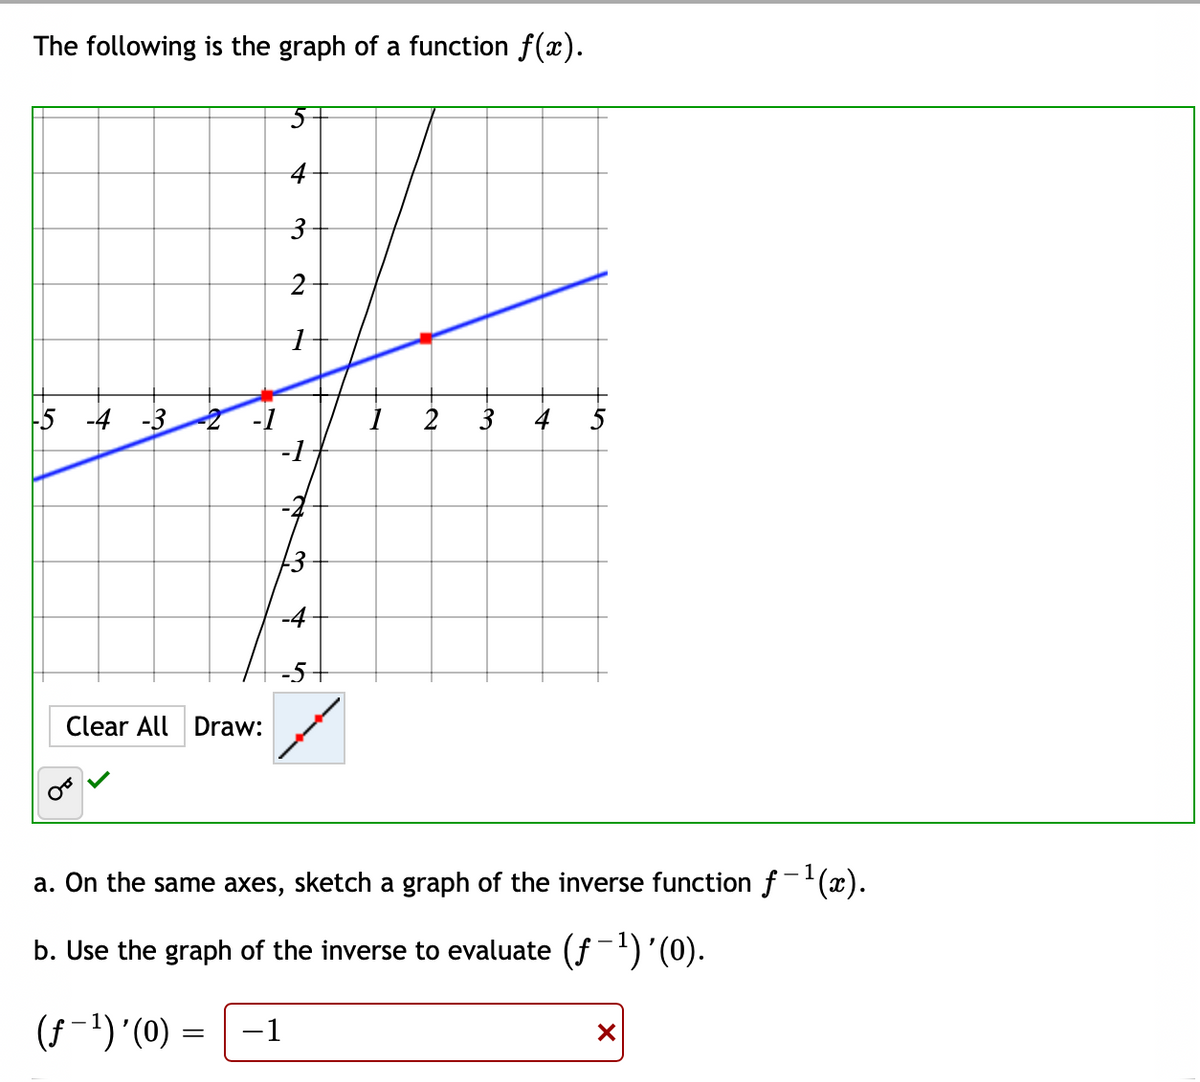 The following is the graph of a function f(x).
2
2 -1
-1
-5 -4 -3
2
3
4
-4
-5+
Clear All Draw:
a. On the same axes, sketch a graph of the inverse function f-'(x).
b. Use the graph of the inverse to evaluate (f-)'(0).
(f-1) '(0)
-1
3.
